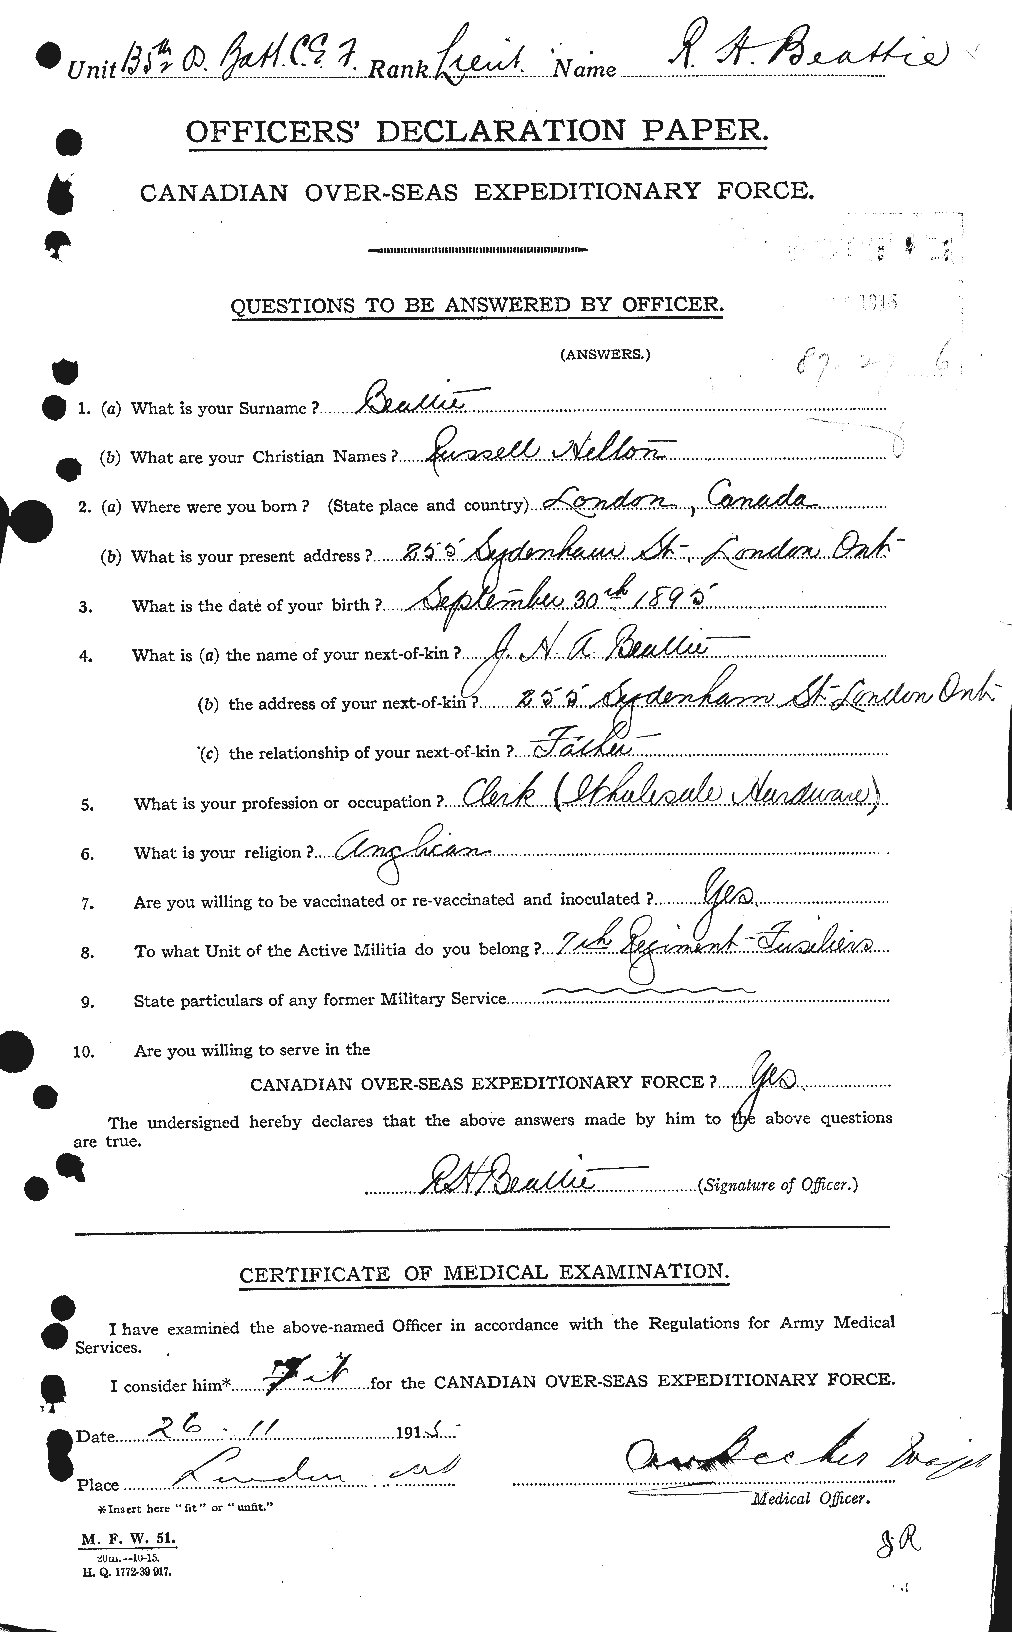 Personnel Records of the First World War - CEF 230796a